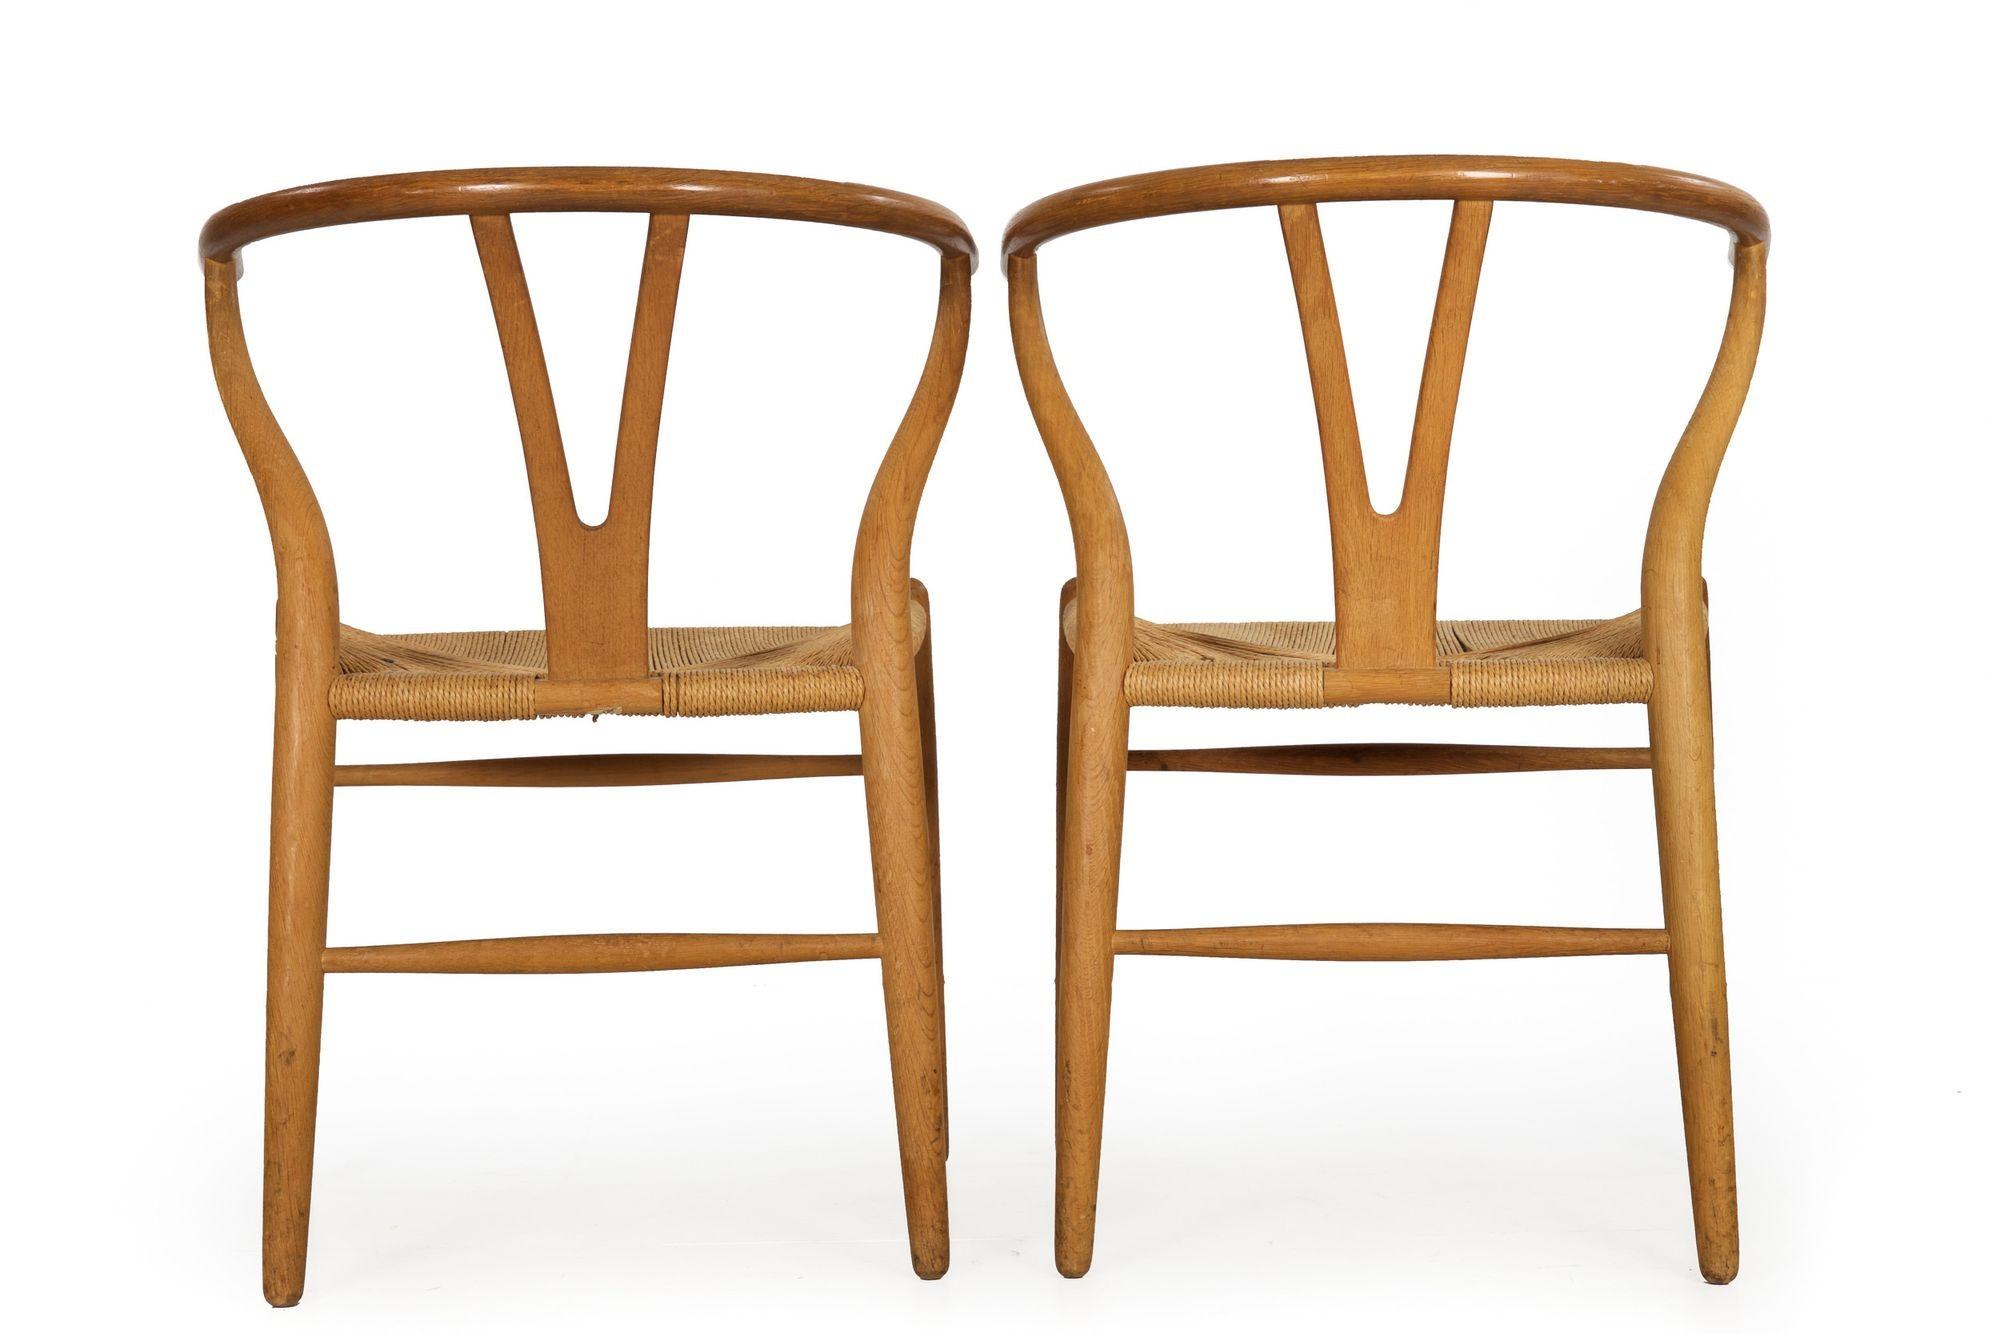 Danish Pair of Patinated Oak “Wishbone” Arm Chairs by Hans Wegner circa 1960s For Sale